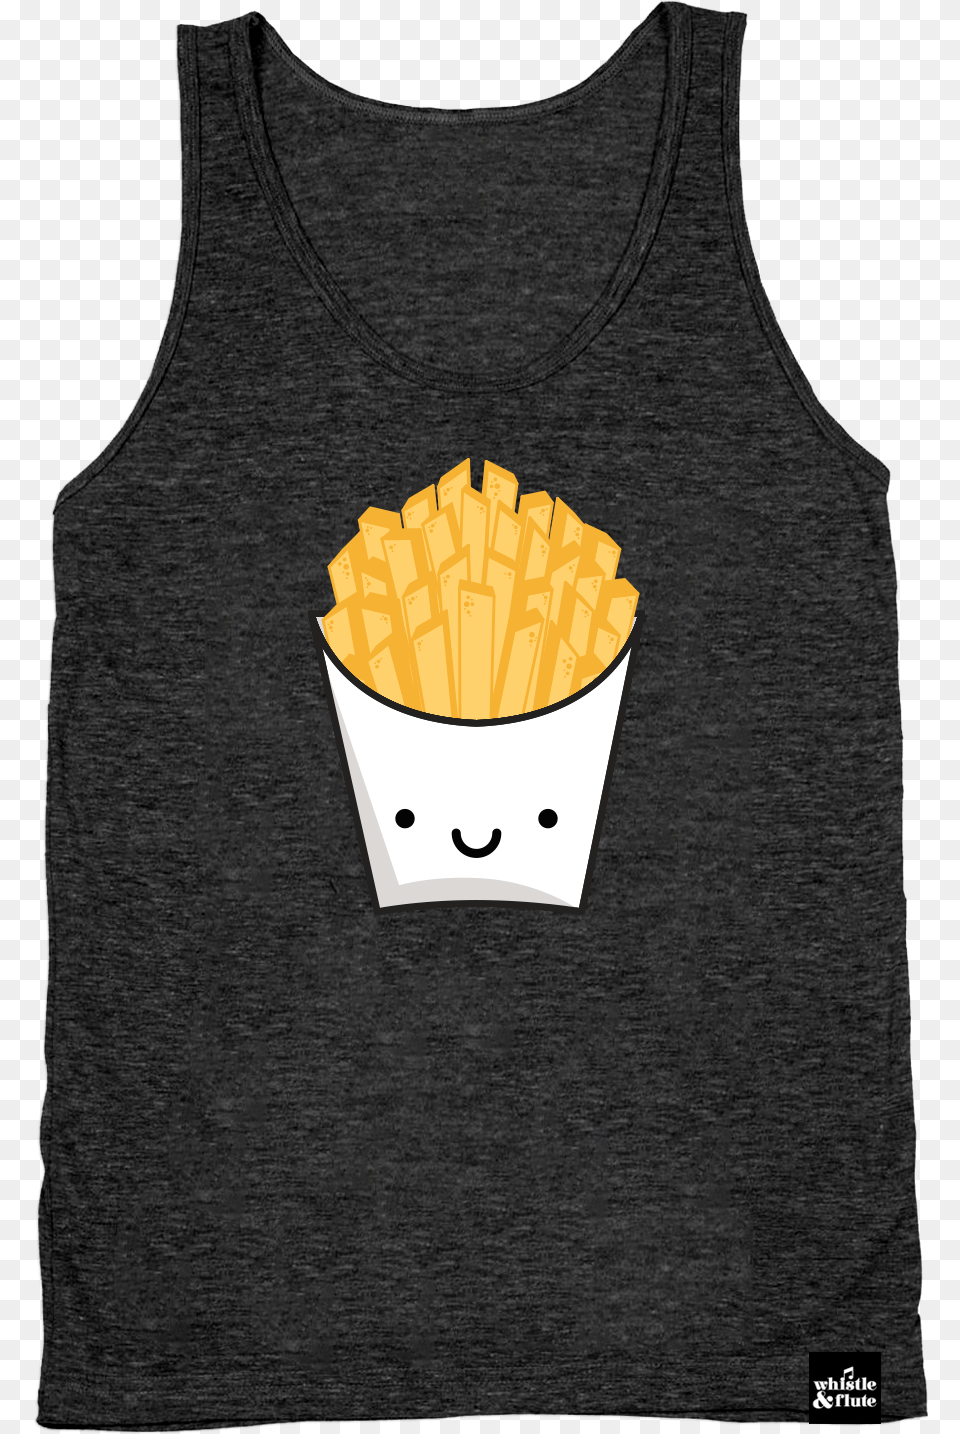 Flute Whistle French Fries, Food, Clothing, Tank Top Free Transparent Png